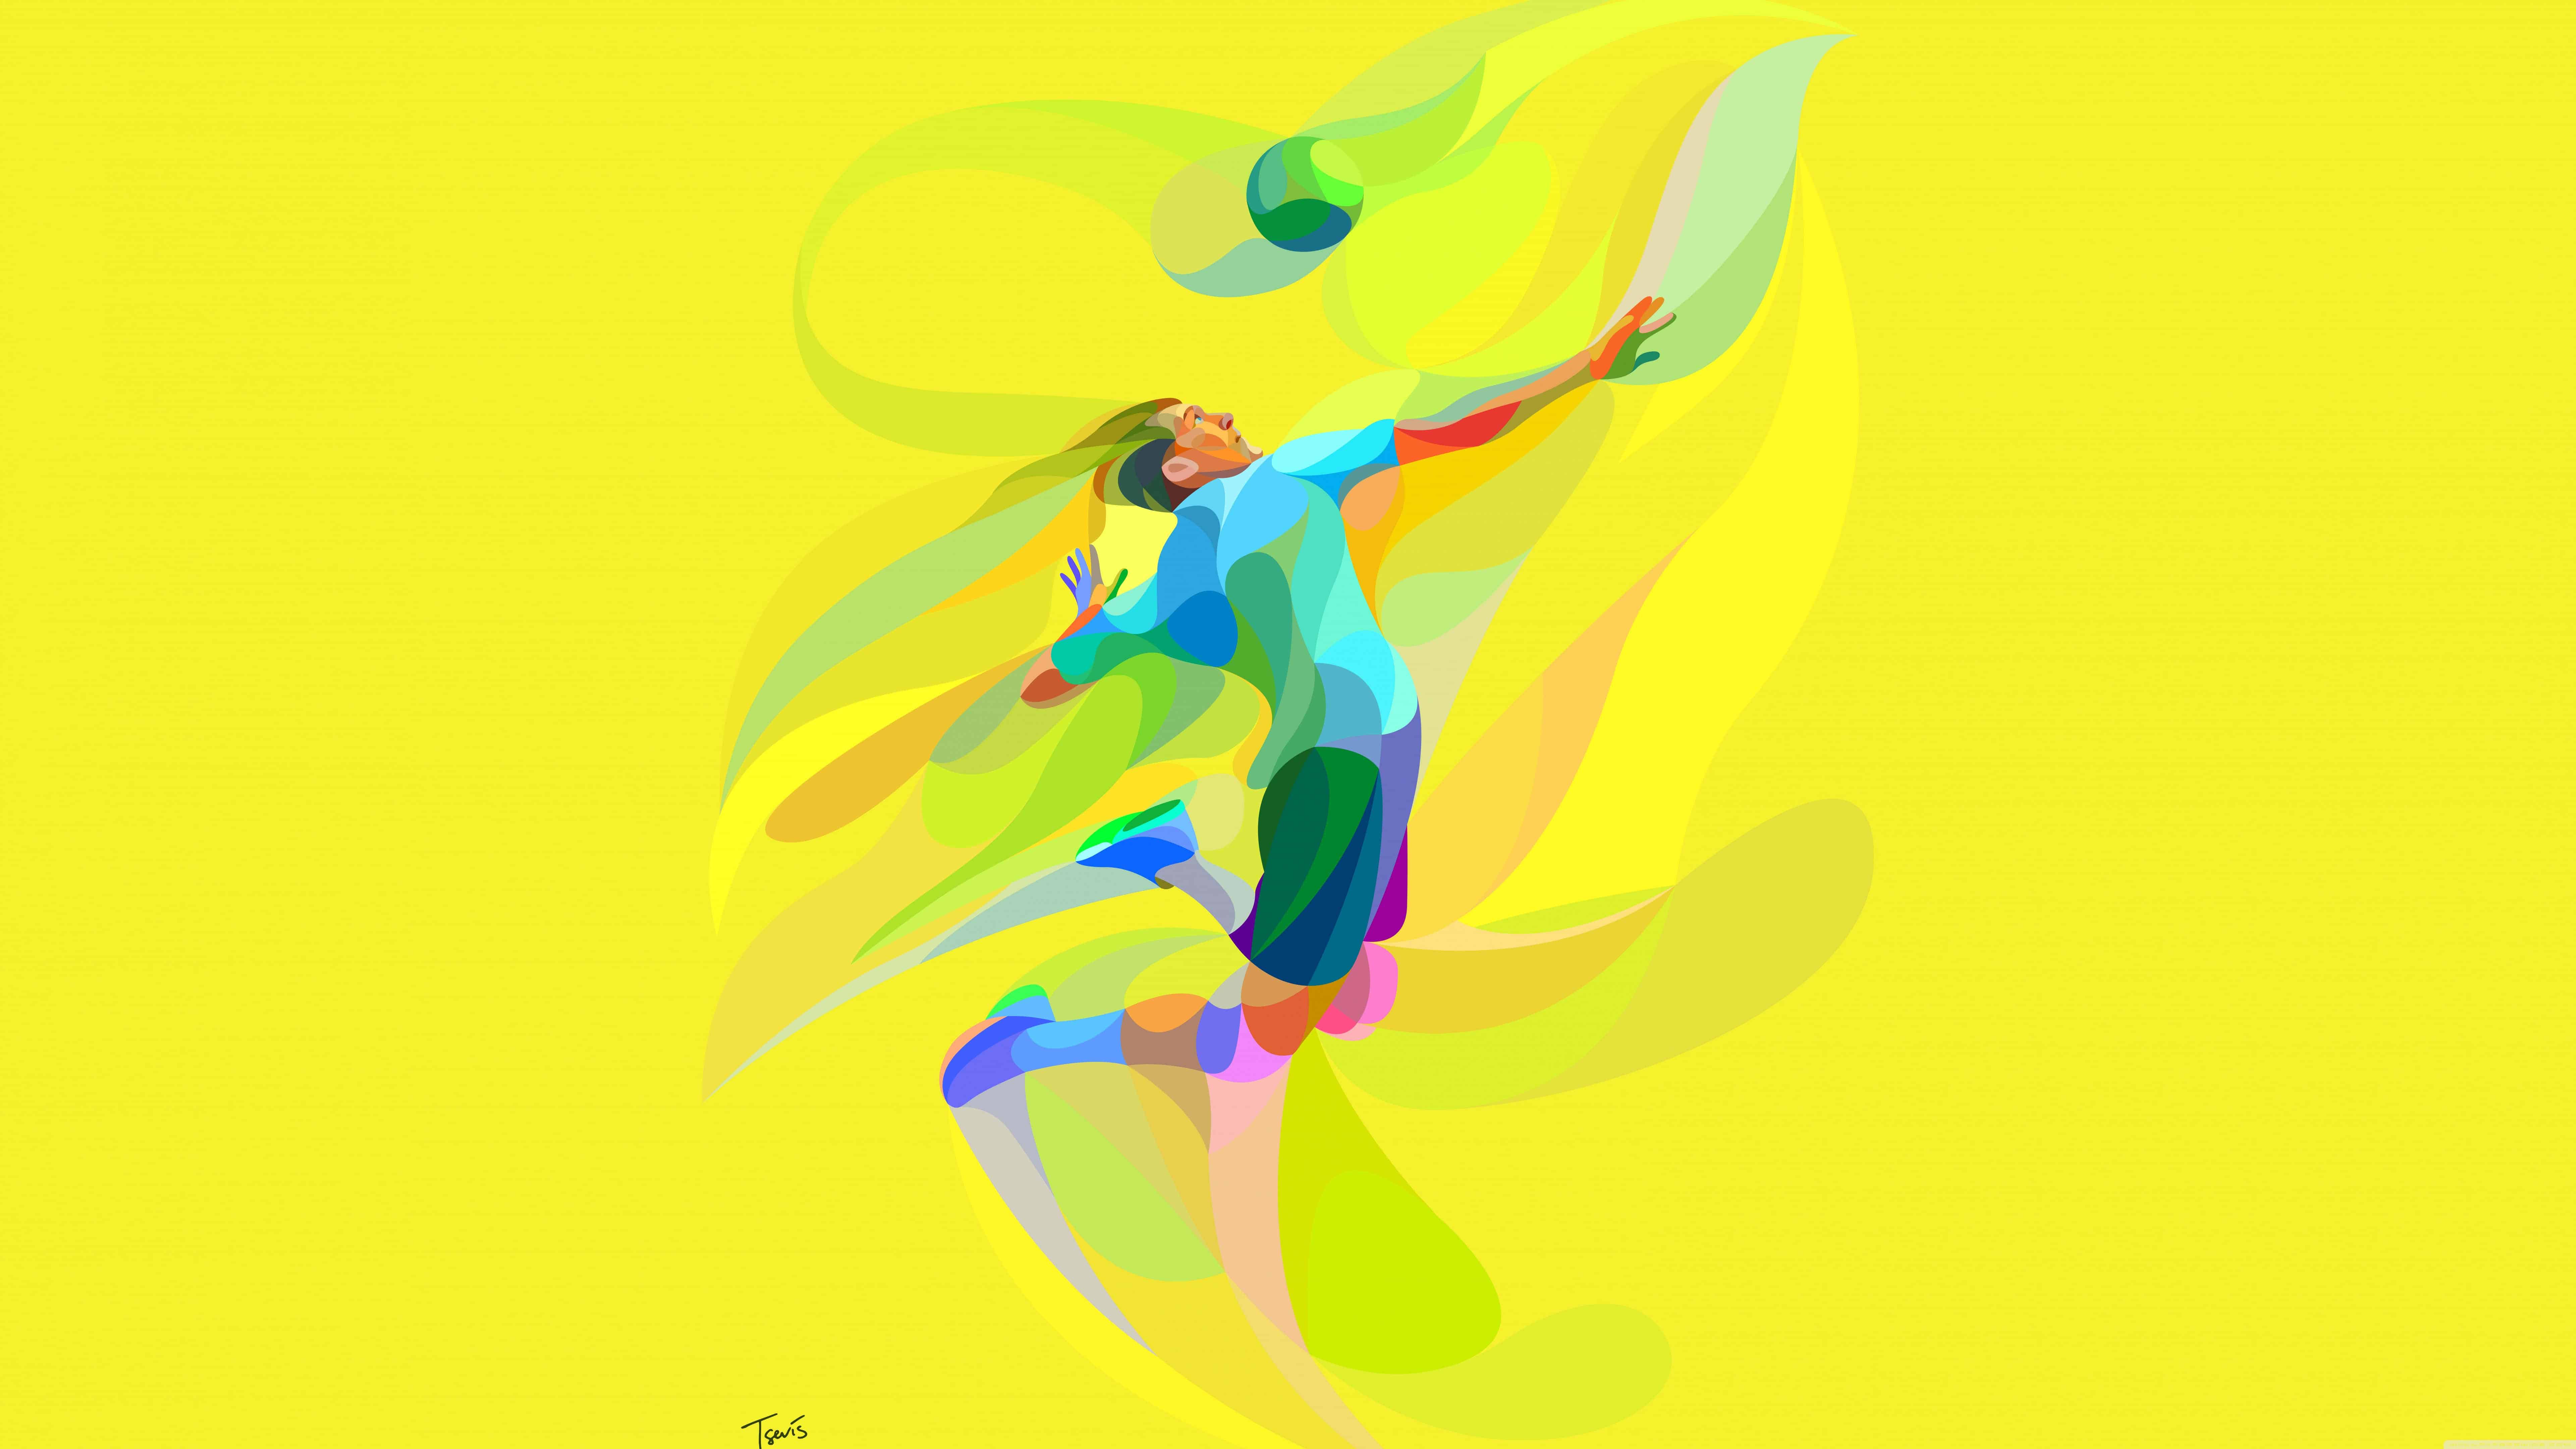 A man is playing tennis on the yellow background - Volleyball